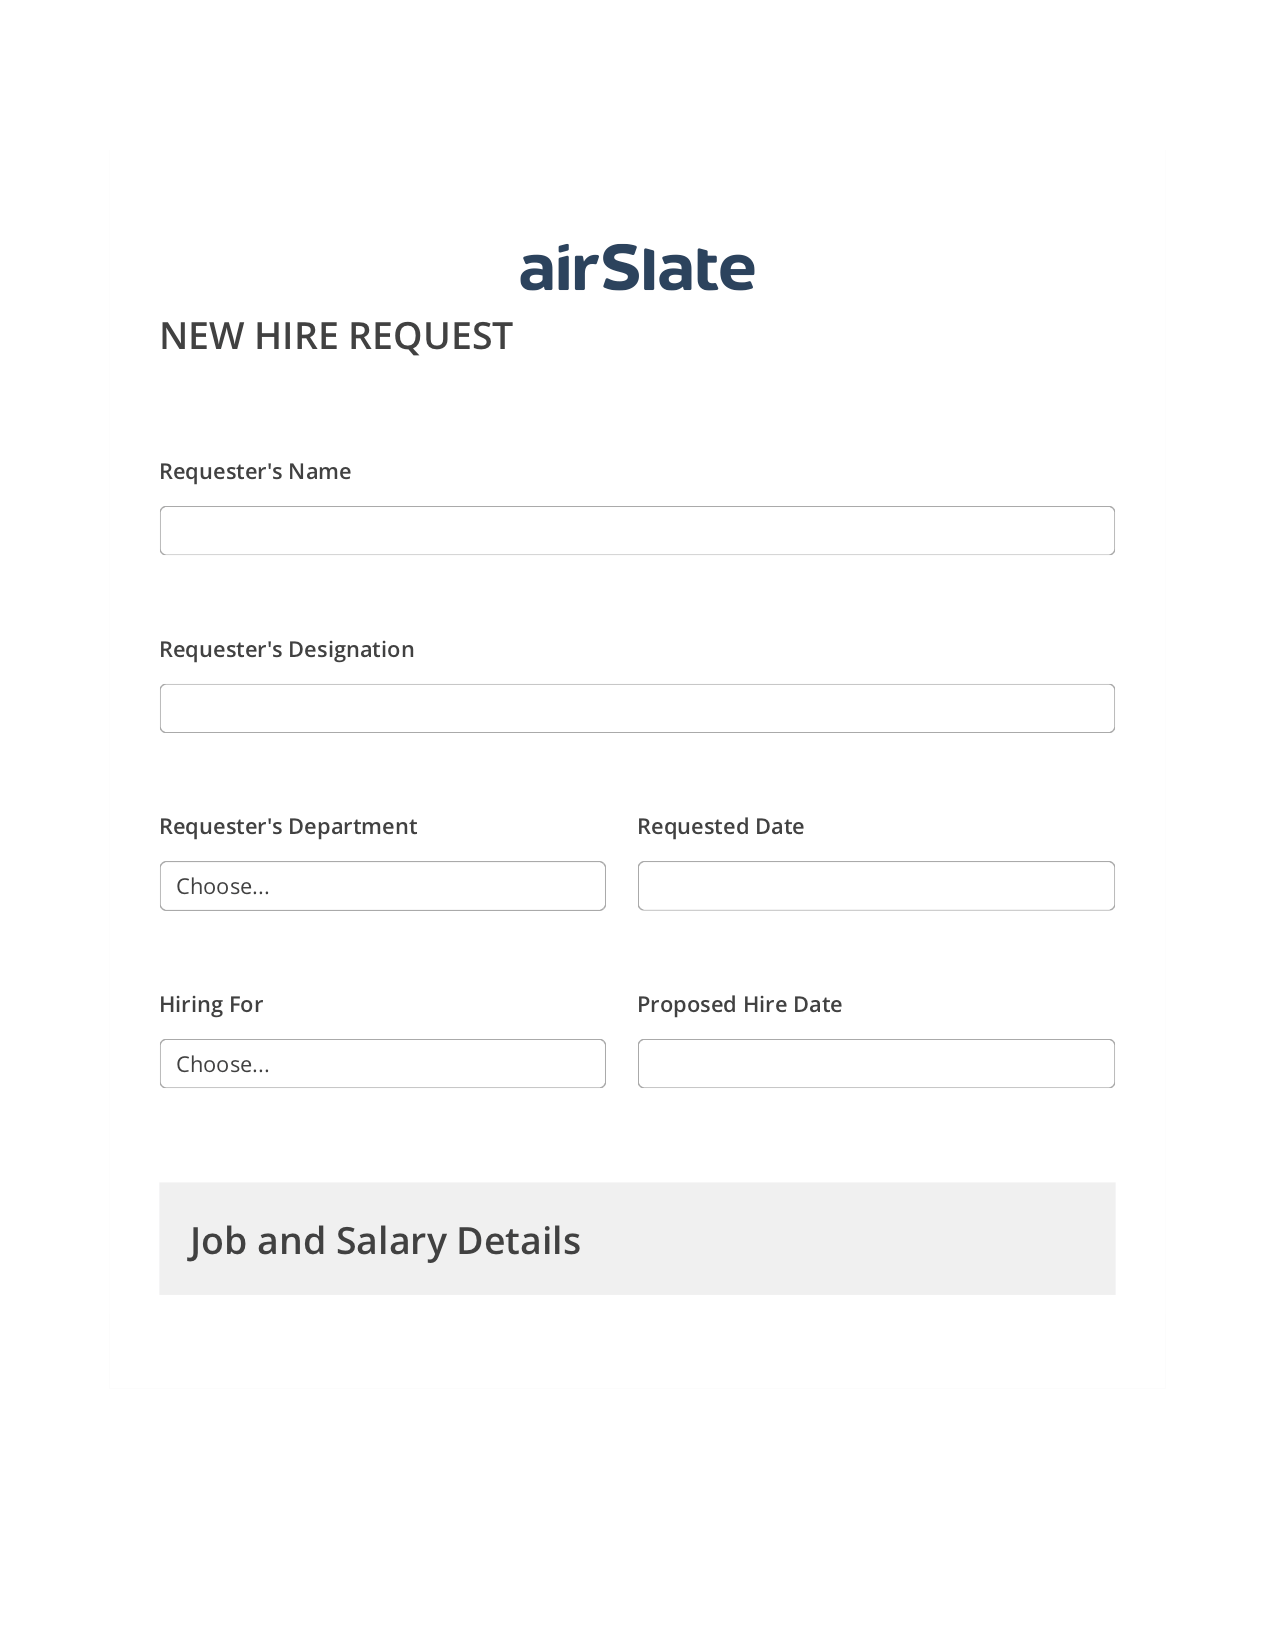 Hiring Request Workflow Pre-fill from another Slate Bot, Add Tags to Slate Bot, Archive to SharePoint Folder Bot